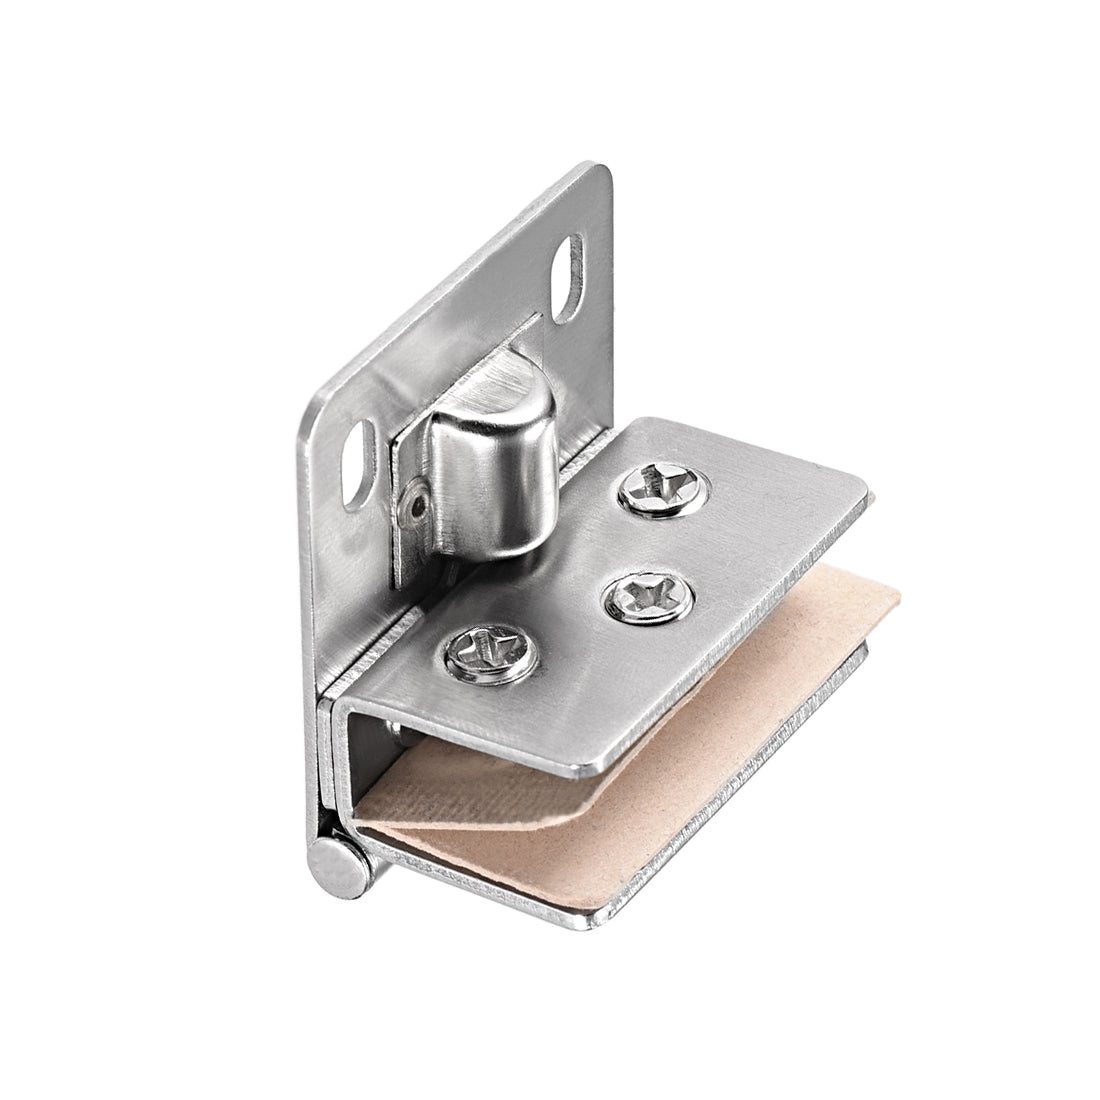 uxcell Uxcell Glass Hinge Cabinet Door Hinge Glass Clamp ,Stainless Steel , for 8-10mm Glass Thickness 4Pcs